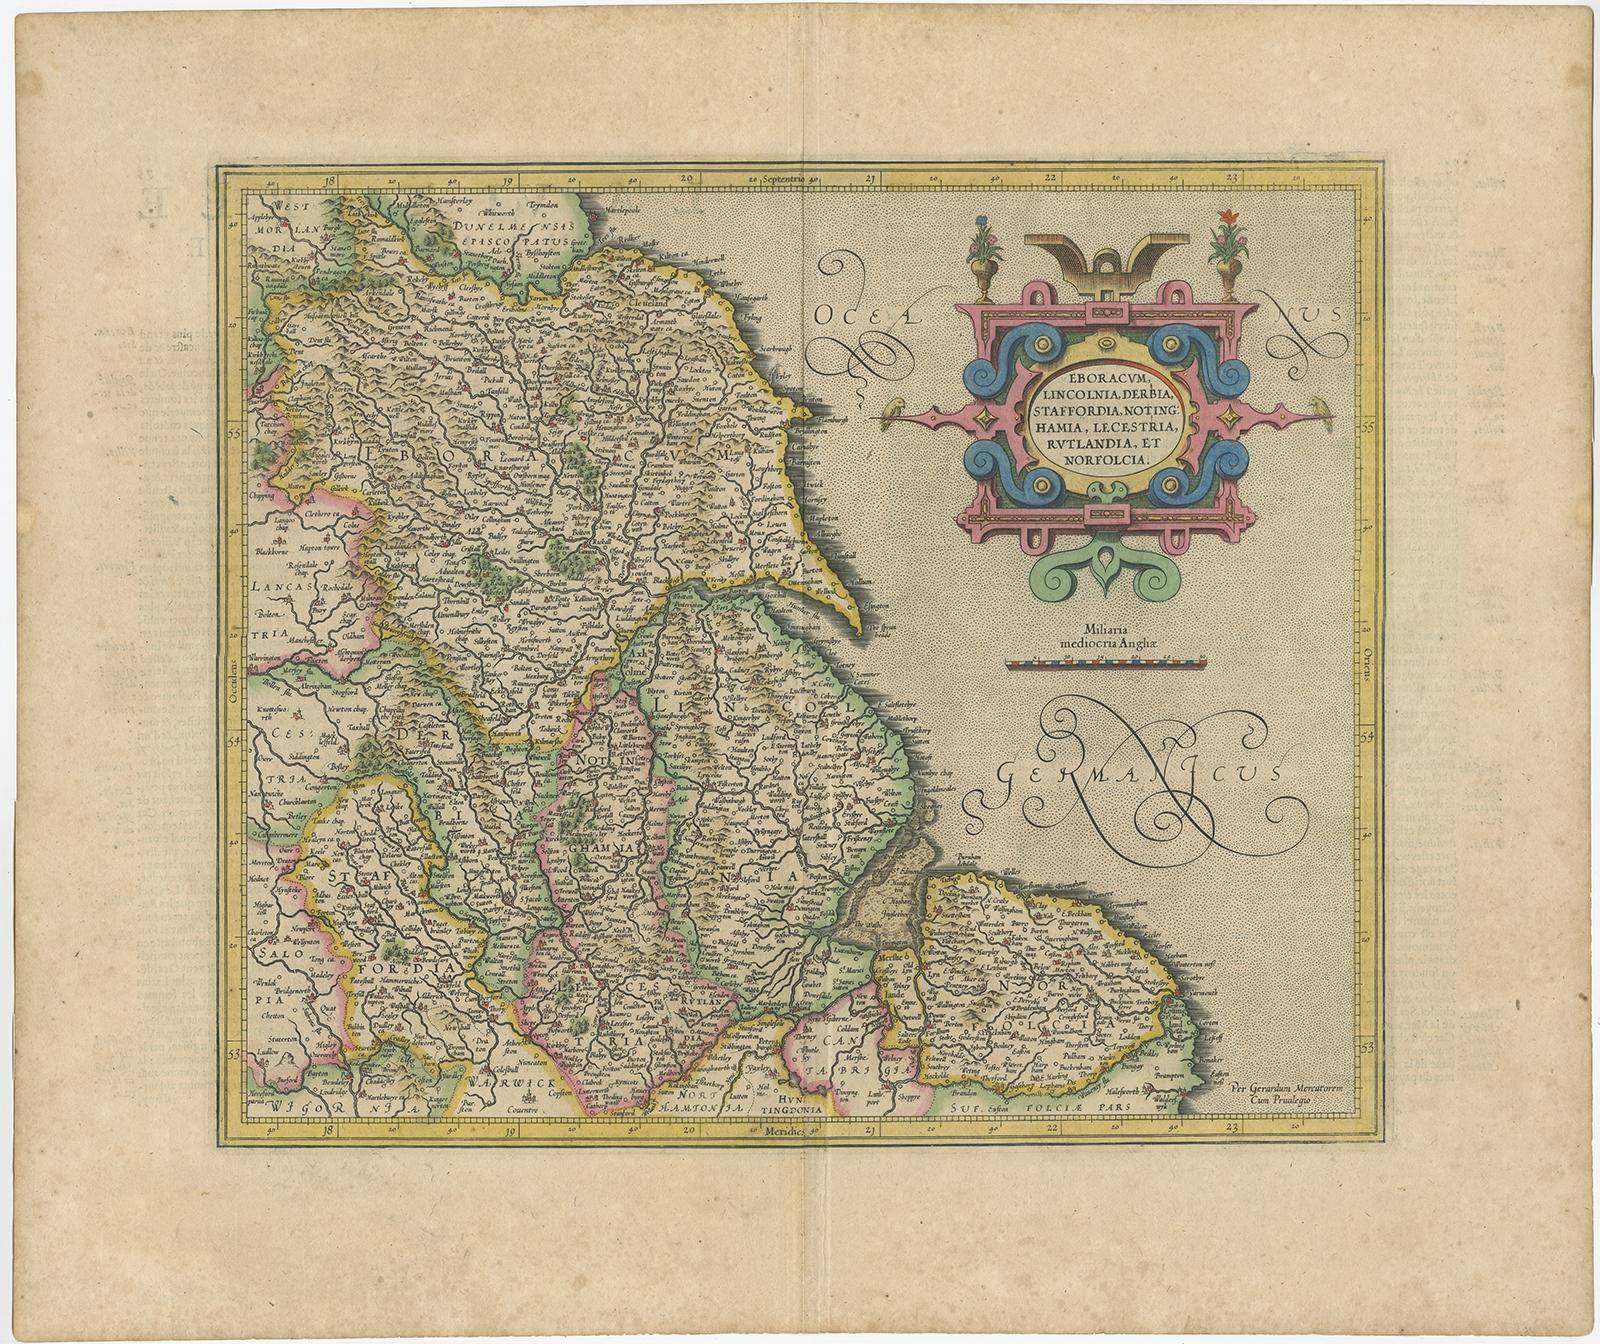 Antique map titled 'Eboracum, Lincolnia, Derbia, Staffordia, Notinghamia, Lecestria, Rutlandia et Norfolcia'. 

Decorative early map of the northeast of England, comprising the counties of Yorkshire, Lincolnshire, Derbyshire, Staffordshire,